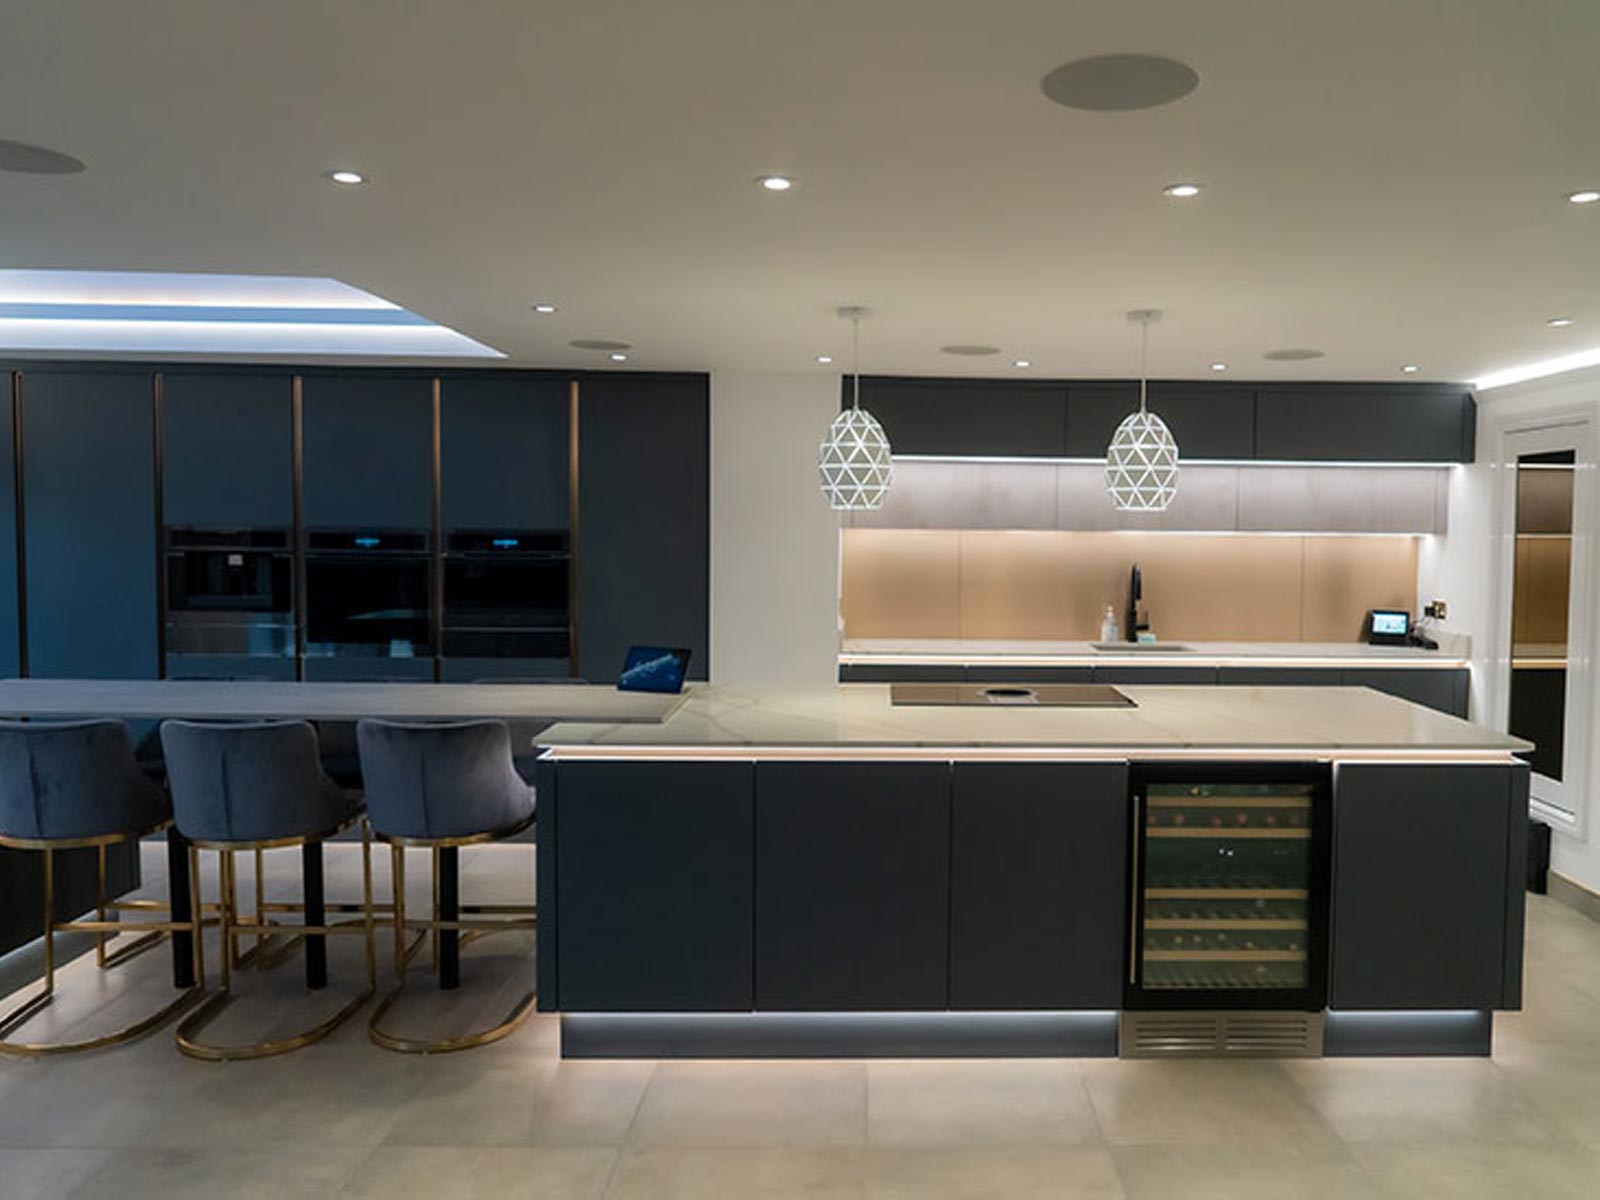 Modern home bar with origami kitchen ceiling lights and black cabinet lighting